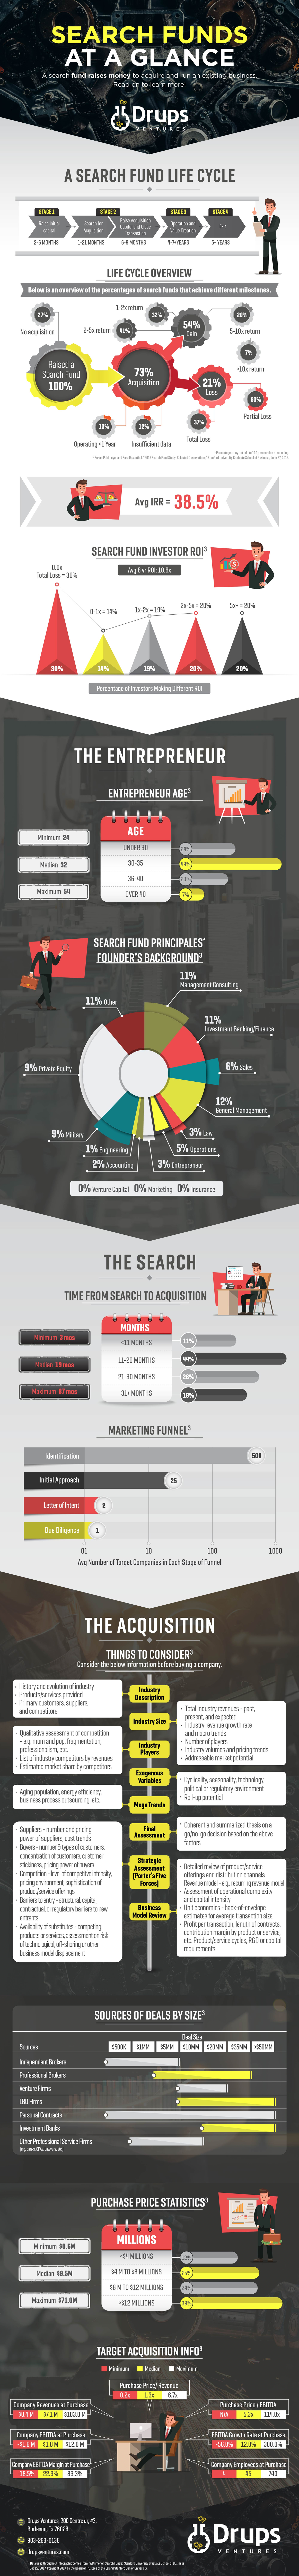 Search Fund Infographic